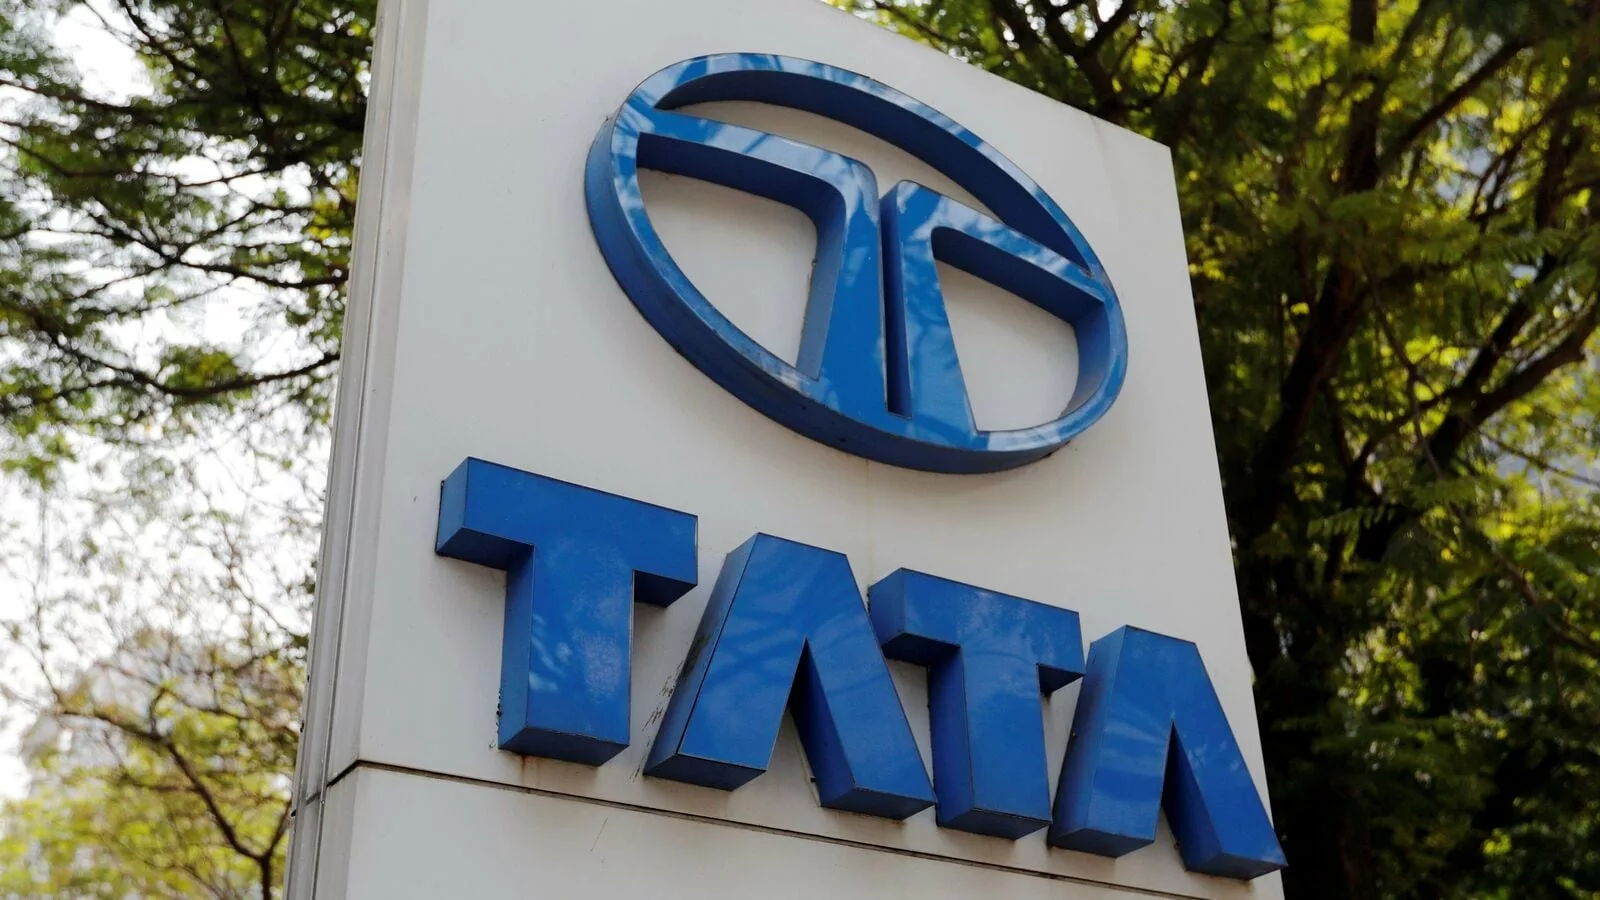 Tata Motors to demerge CV and PV business as seperate listed companies